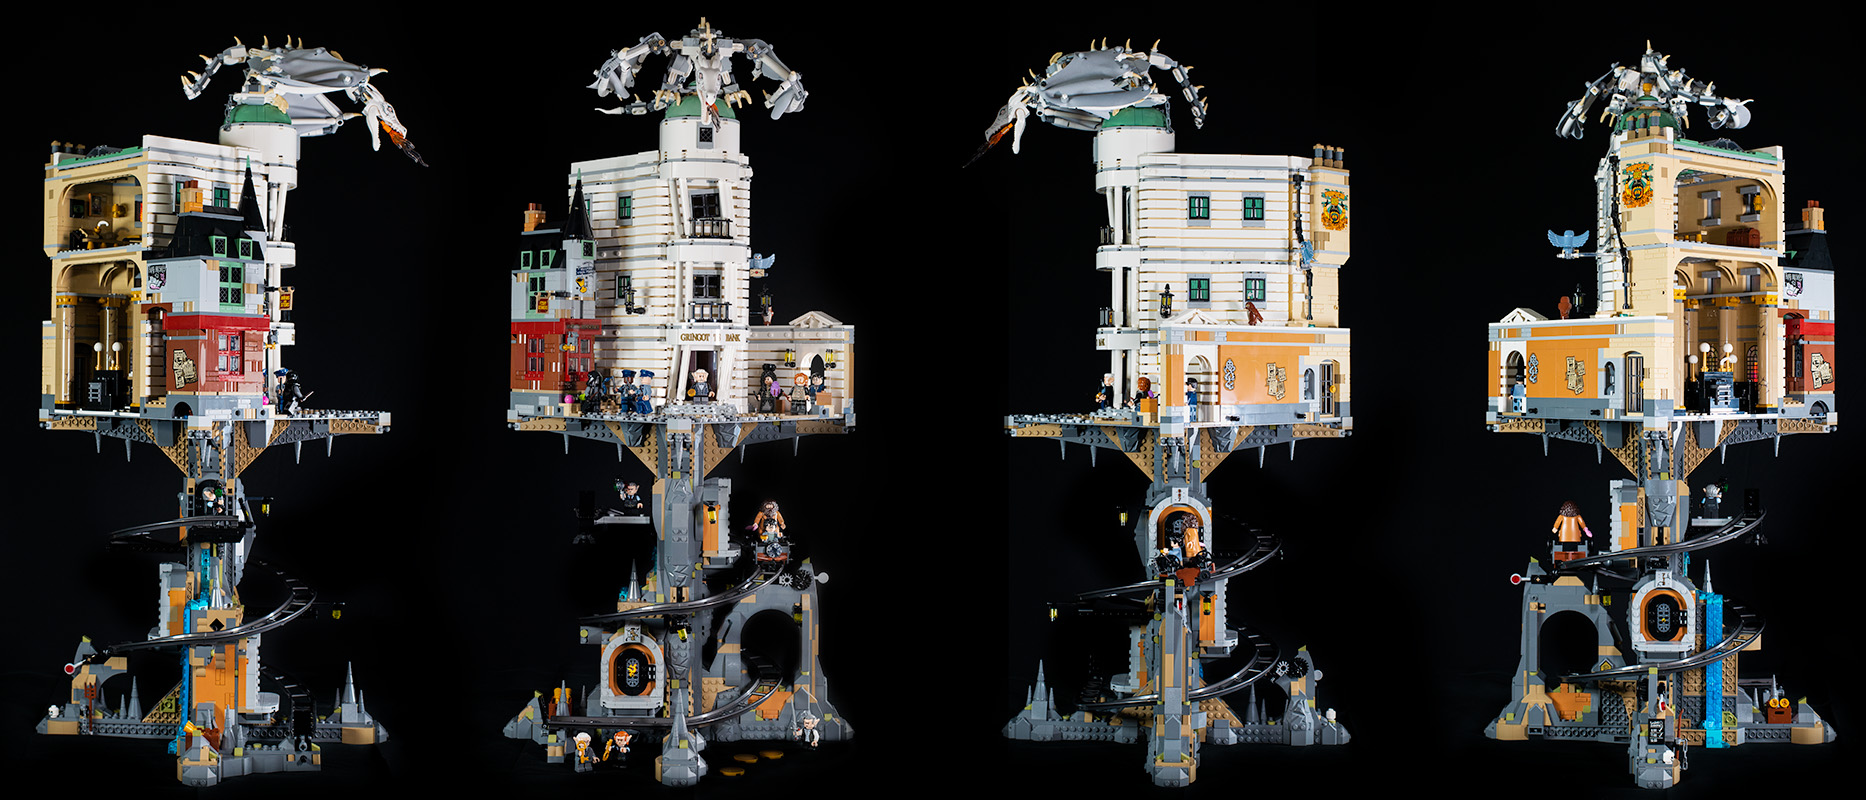 Nearly 5,000-Piece LEGO Harry Potter Collectors' Edition Gringotts